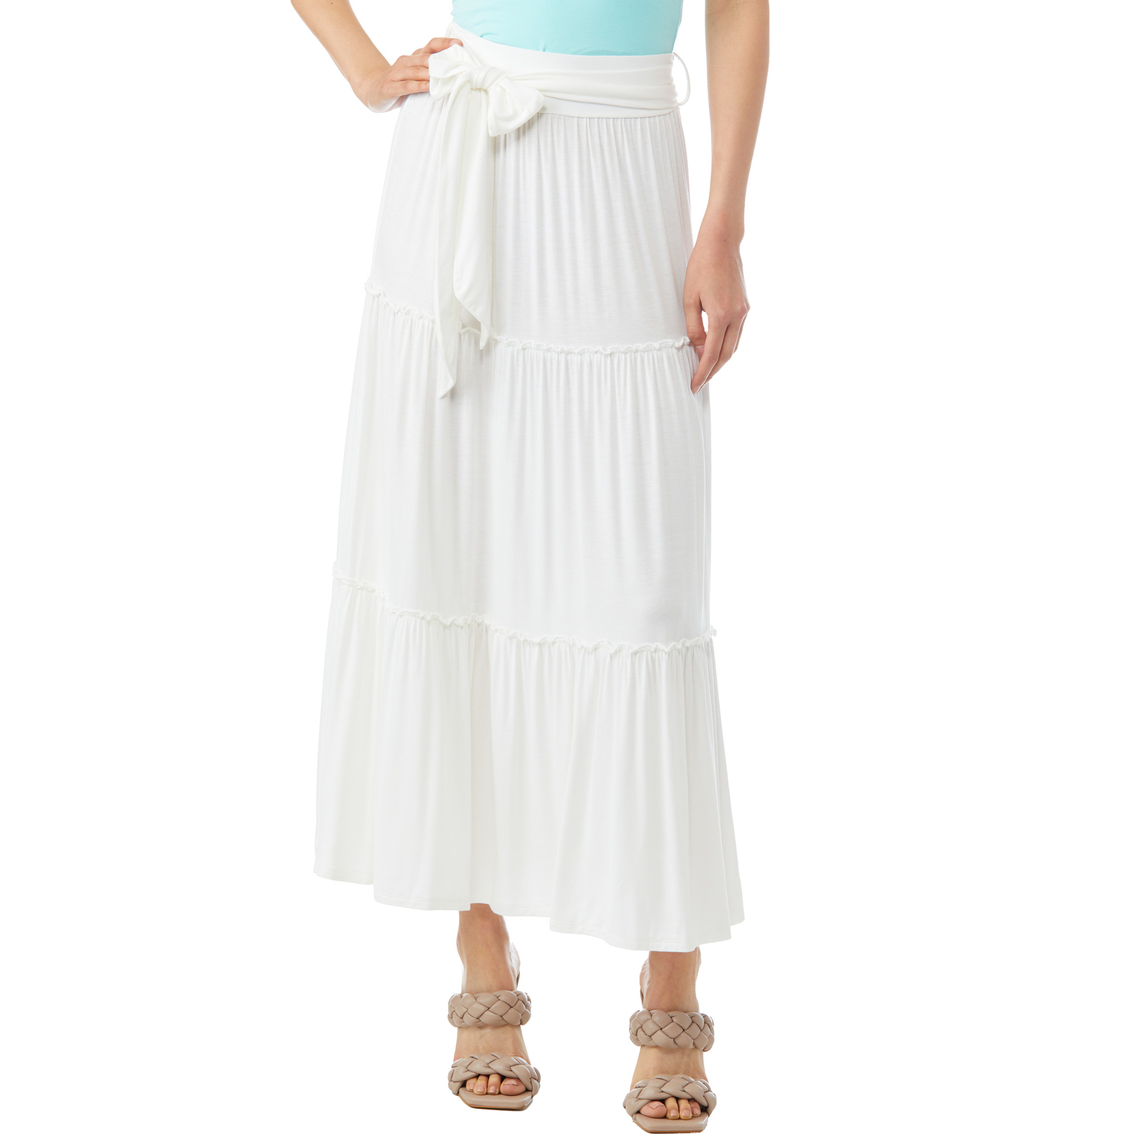 Jw Tiered Maxi Skirt | Skirts | Clothing & Accessories | Shop The Exchange